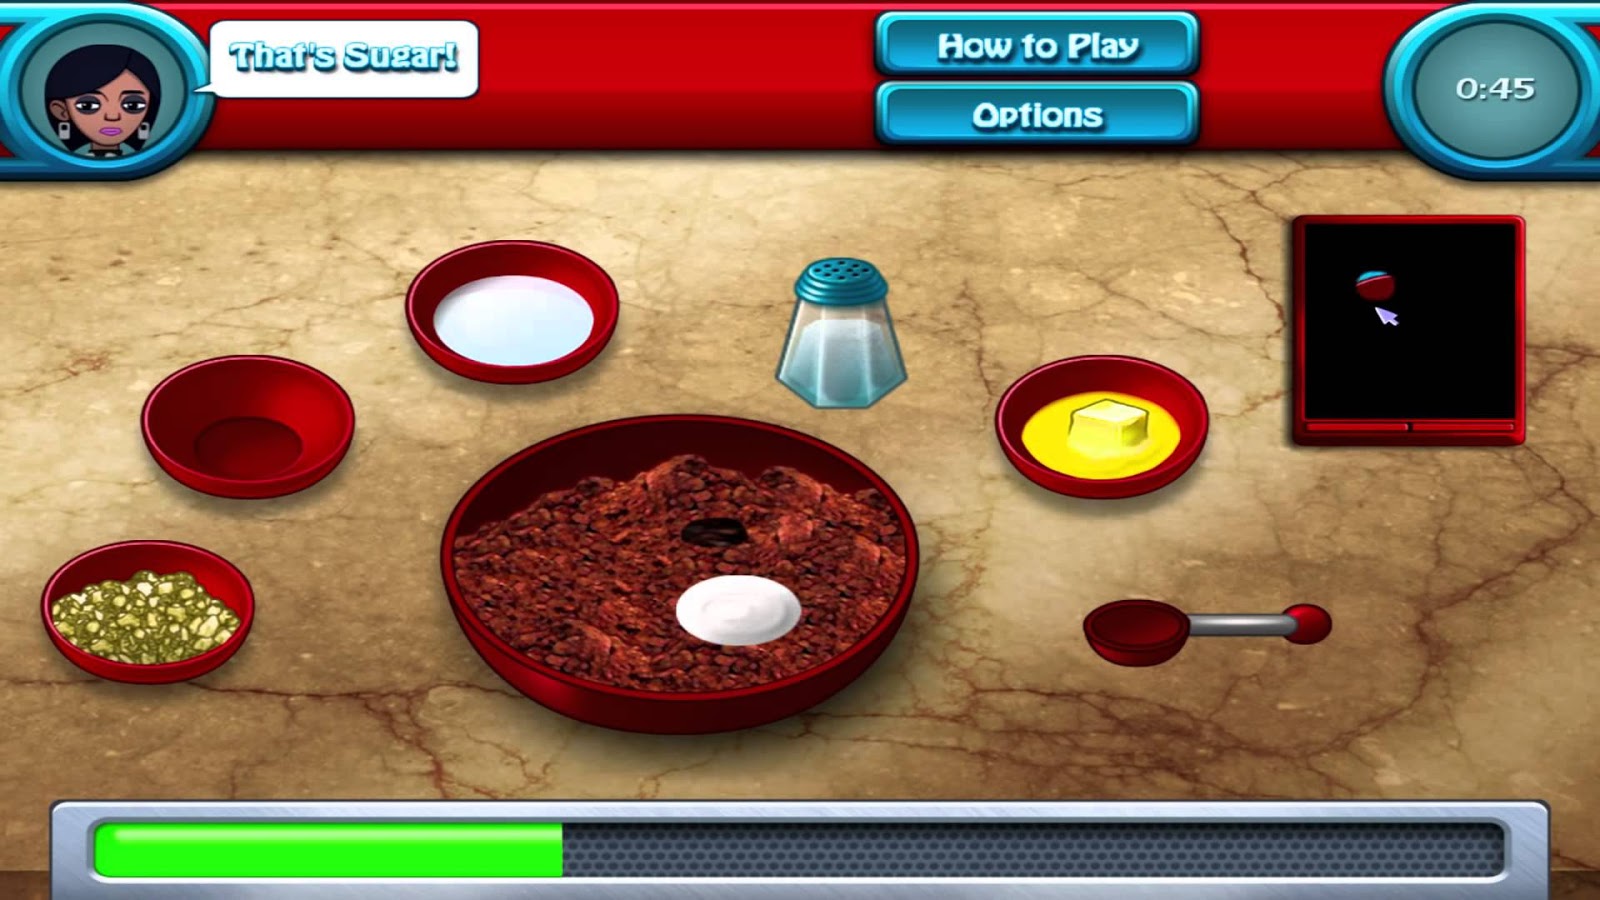 cooking academy 2 free download full version